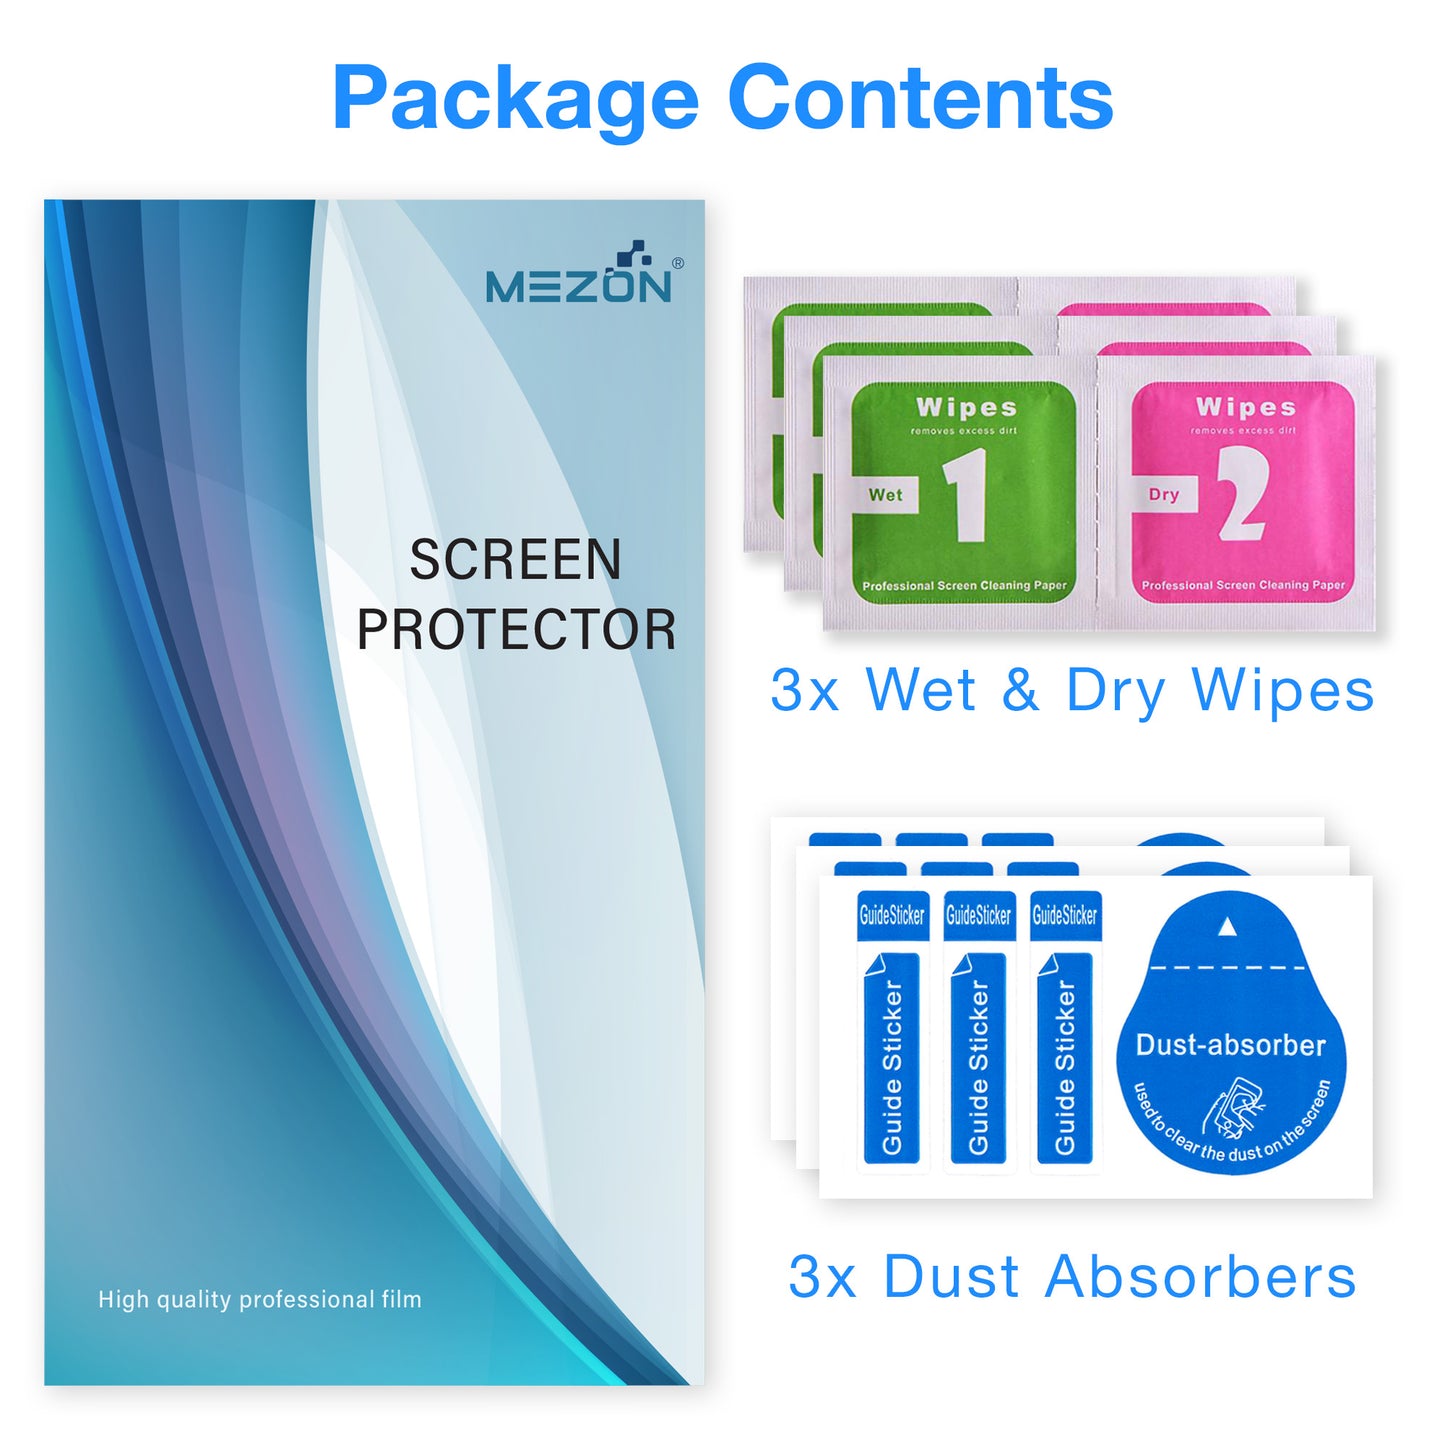 [3 Pack] MEZON Vivo Y52 5G Ultra Clear Screen Protector Case Friendly Film (Vivo Y52 5G, Clear)